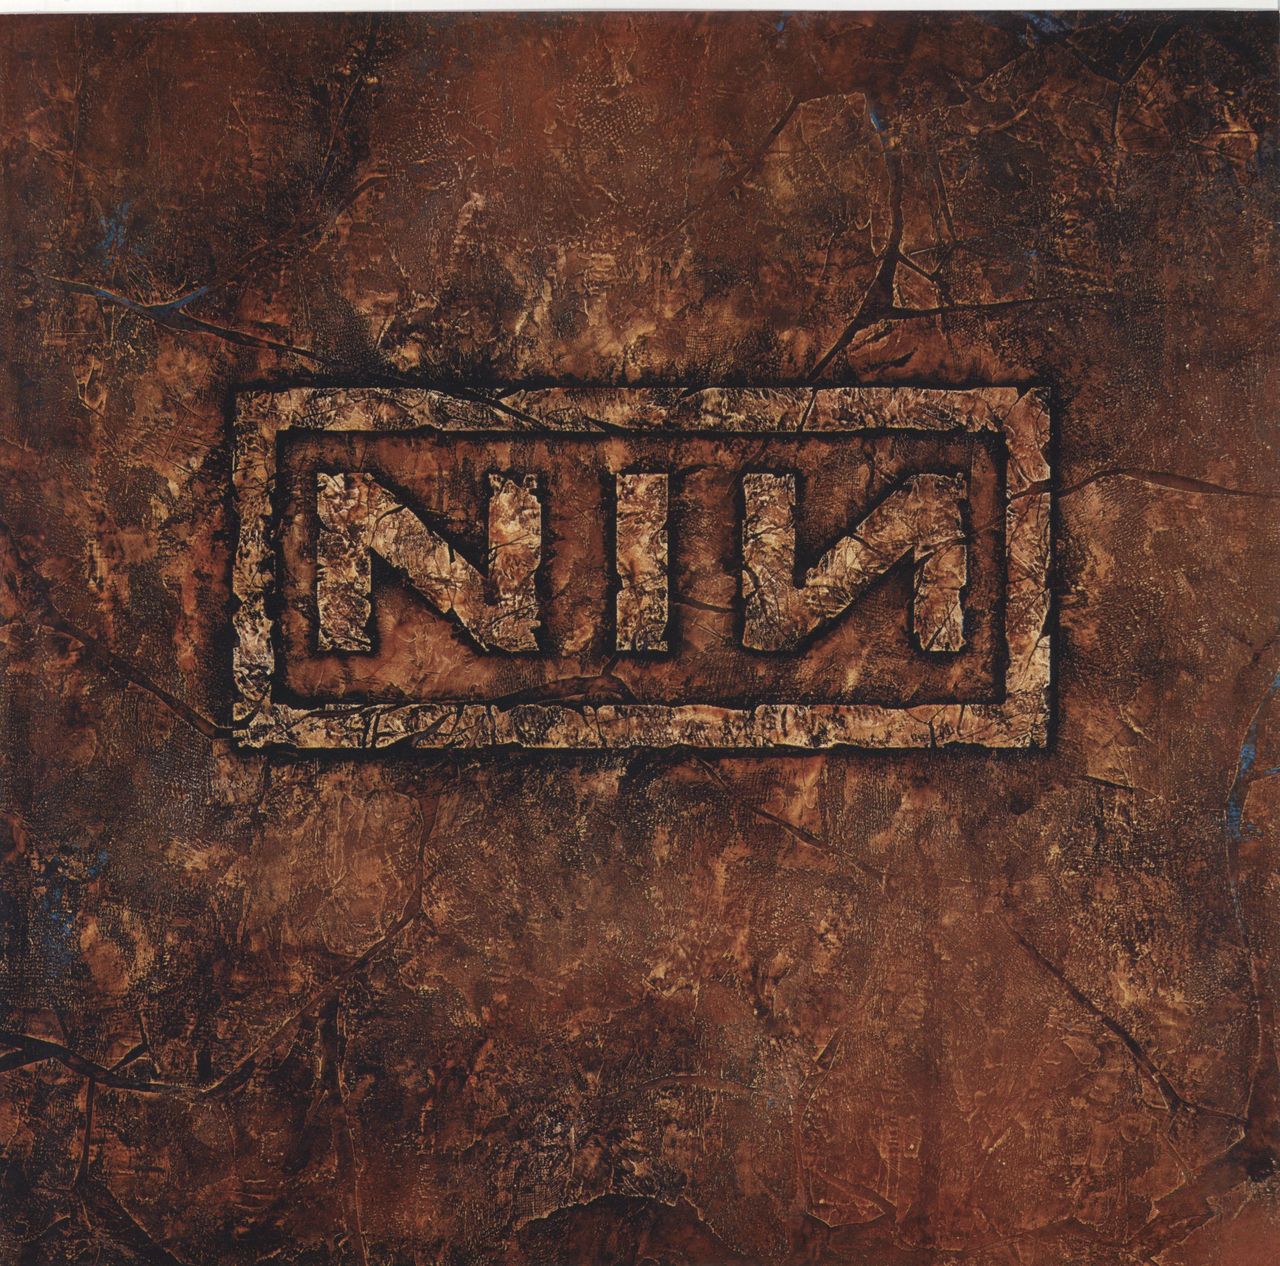 News about Nine Inch Nails and Trent Reznor at The NIN Hotline. Featuring  The Downward Spiral Live, a must-have fan compiled DVD